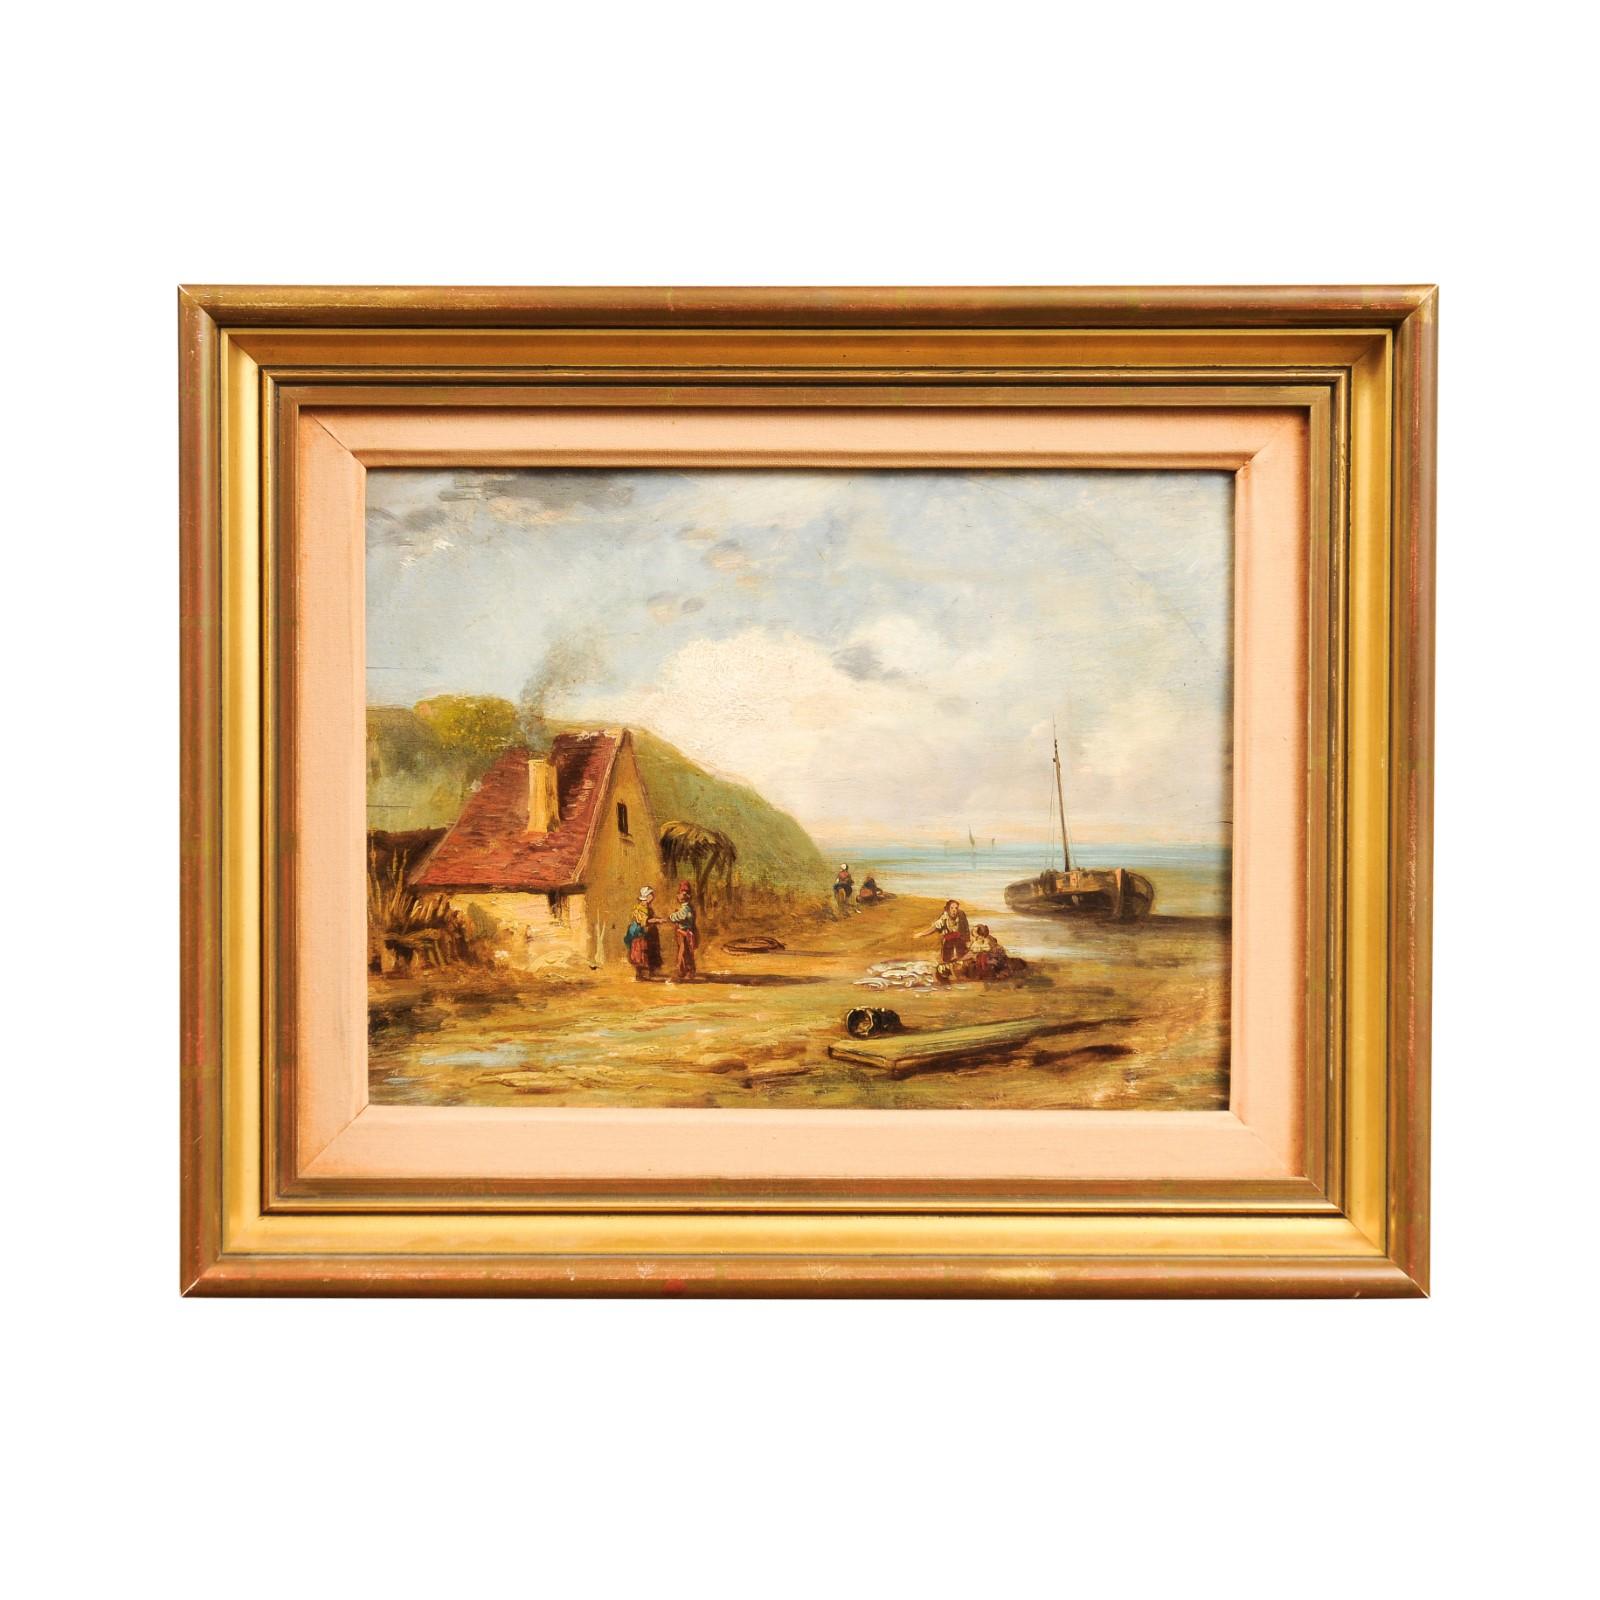 A French 19th century framed oil on panel painting depicting a scene of village life by the sea, under a cloudy sky. Exuding a tranquil ambiance with undertones of bustling daily life, this exquisite 19th-century French oil on panel painting invites